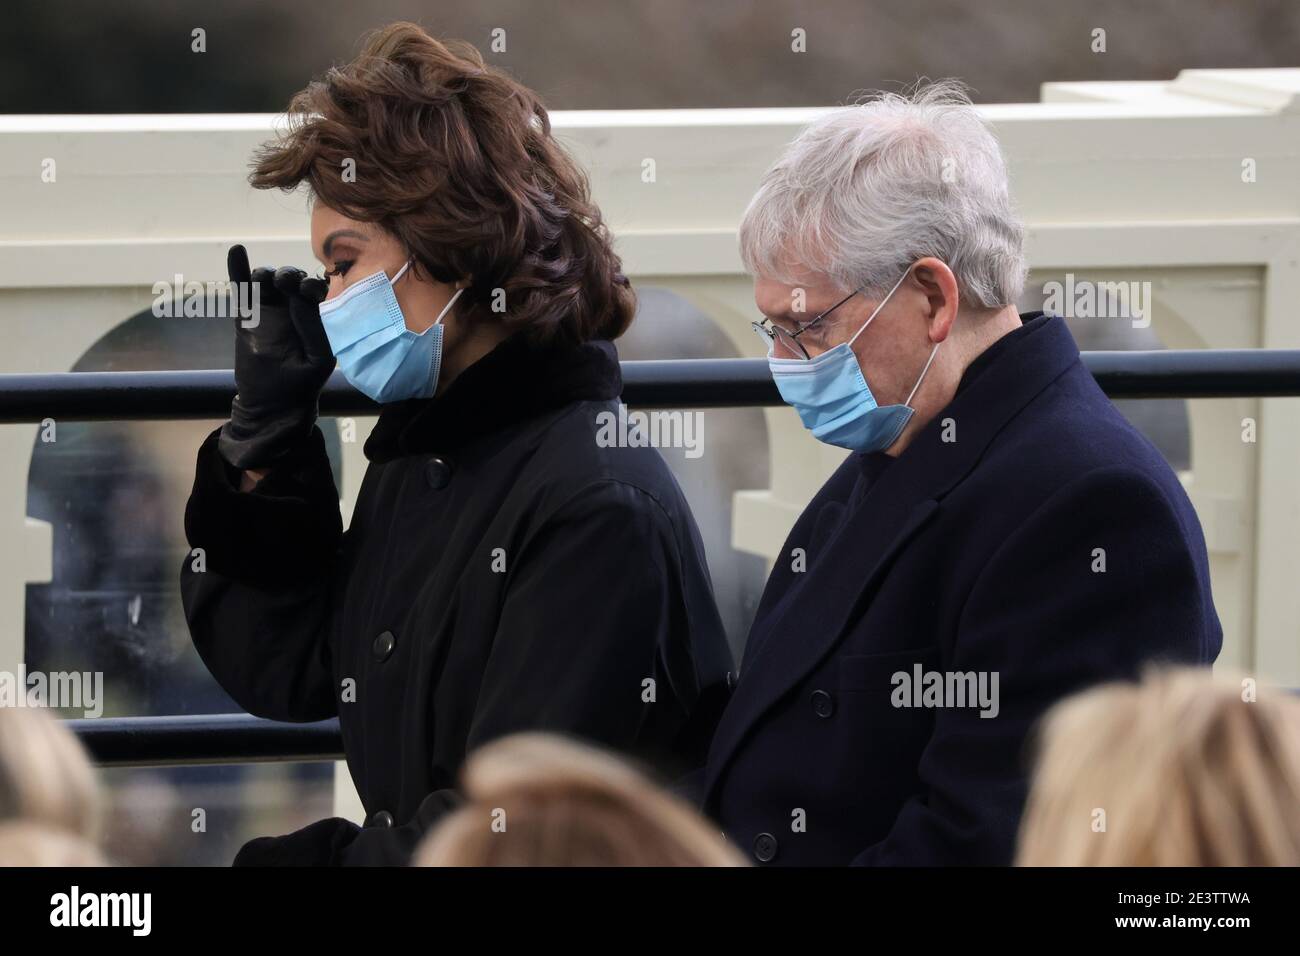 Senator Mitch McConnell (R-KY) and his wife Elaine Chao attend the inauguration of Joe Biden as the 46th President of the United States on the West Front of the U.S. Capitol in Washington, U.S., January 20, 2021. REUTERS/Jonathan Ernst/Pool/MediaPunch Stock Photo